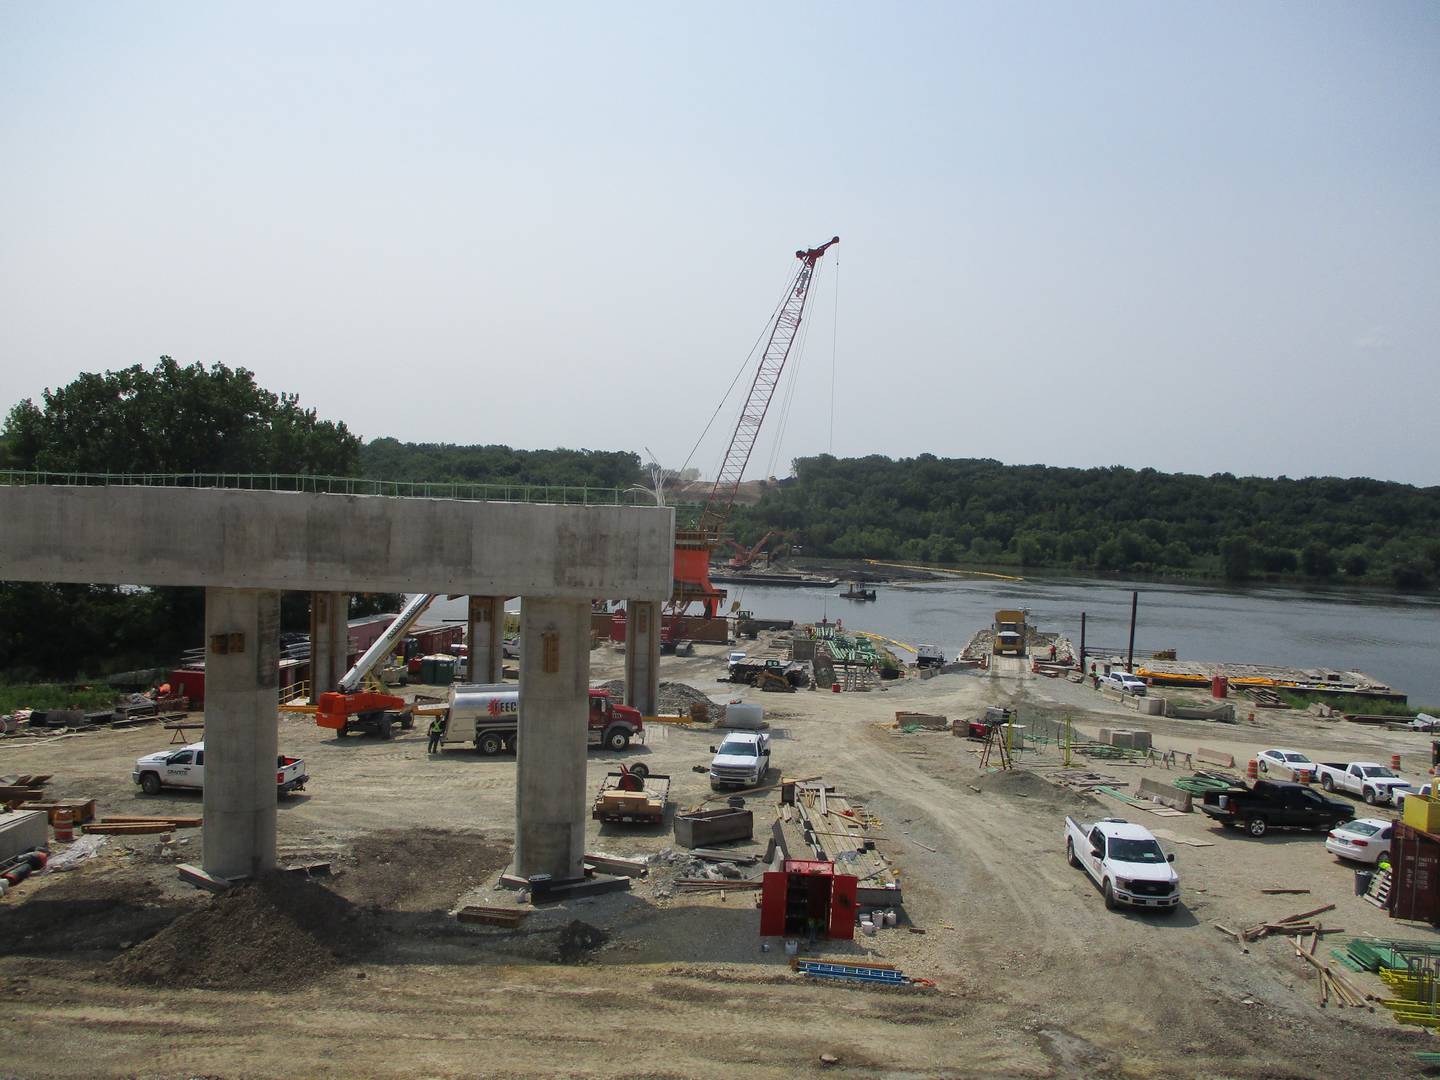 One of the three support piers already built for the future Houbolt Road bridge in Joliet is seen on Tuesday, July 20, 2021.